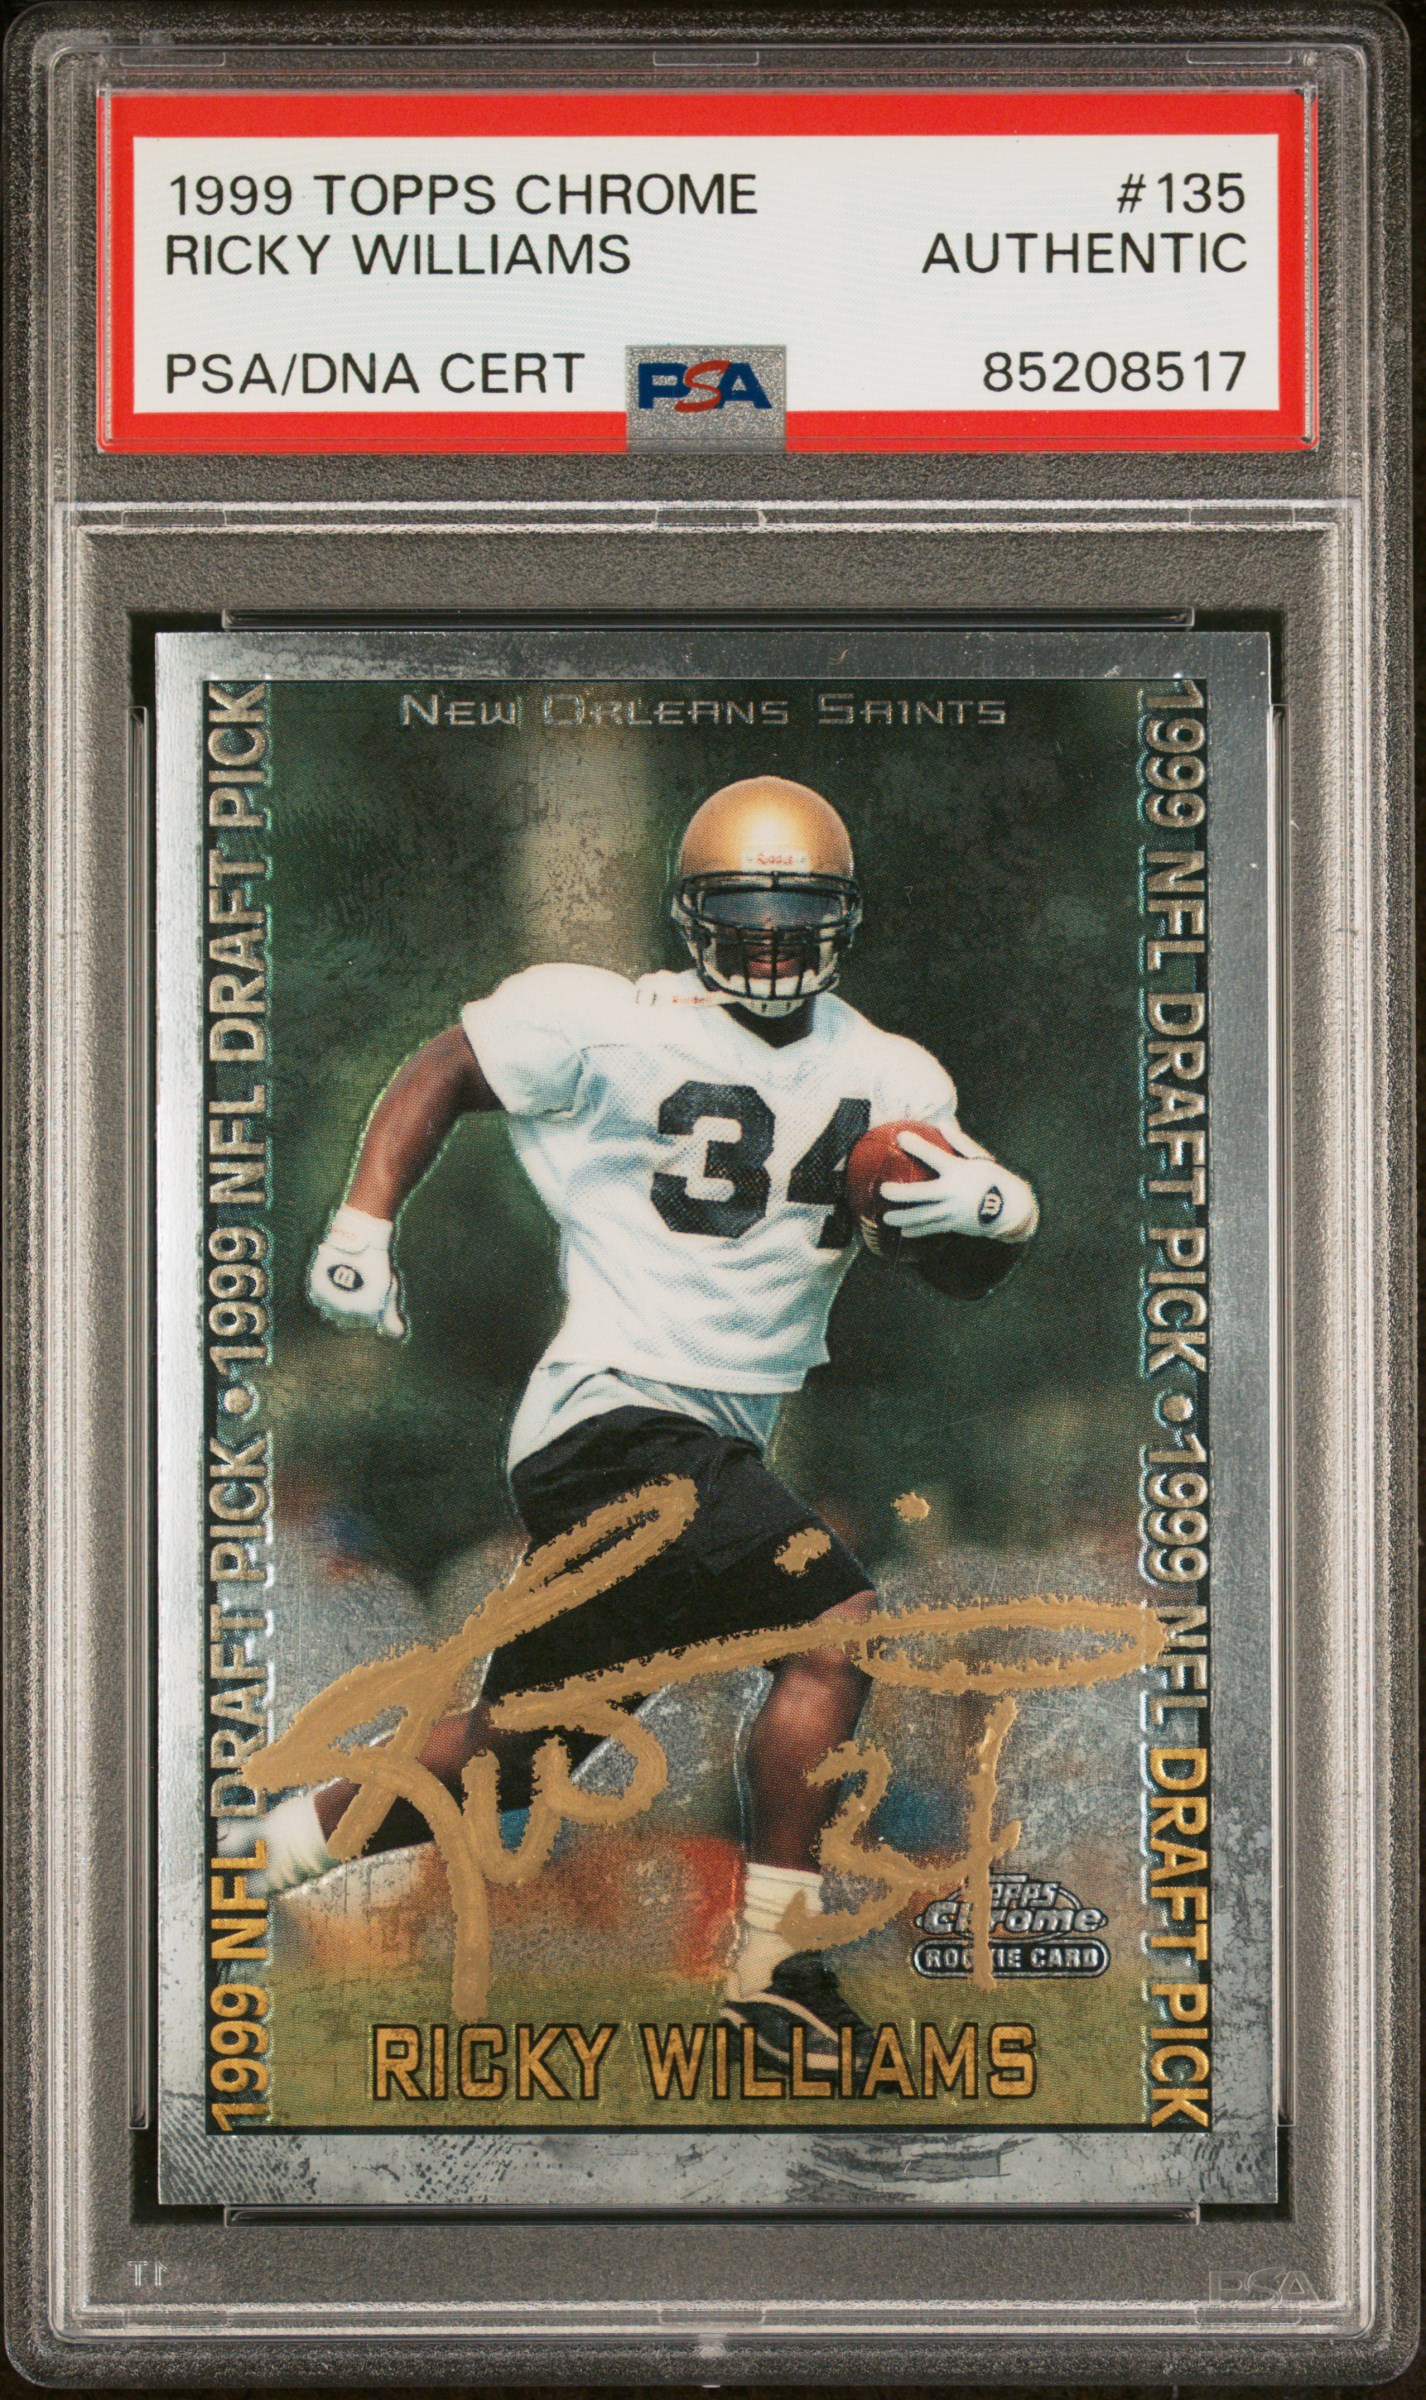 Ricky Williams 1999 Topps Chrome Signed Rookie Card #135 Auto PSA 85208517